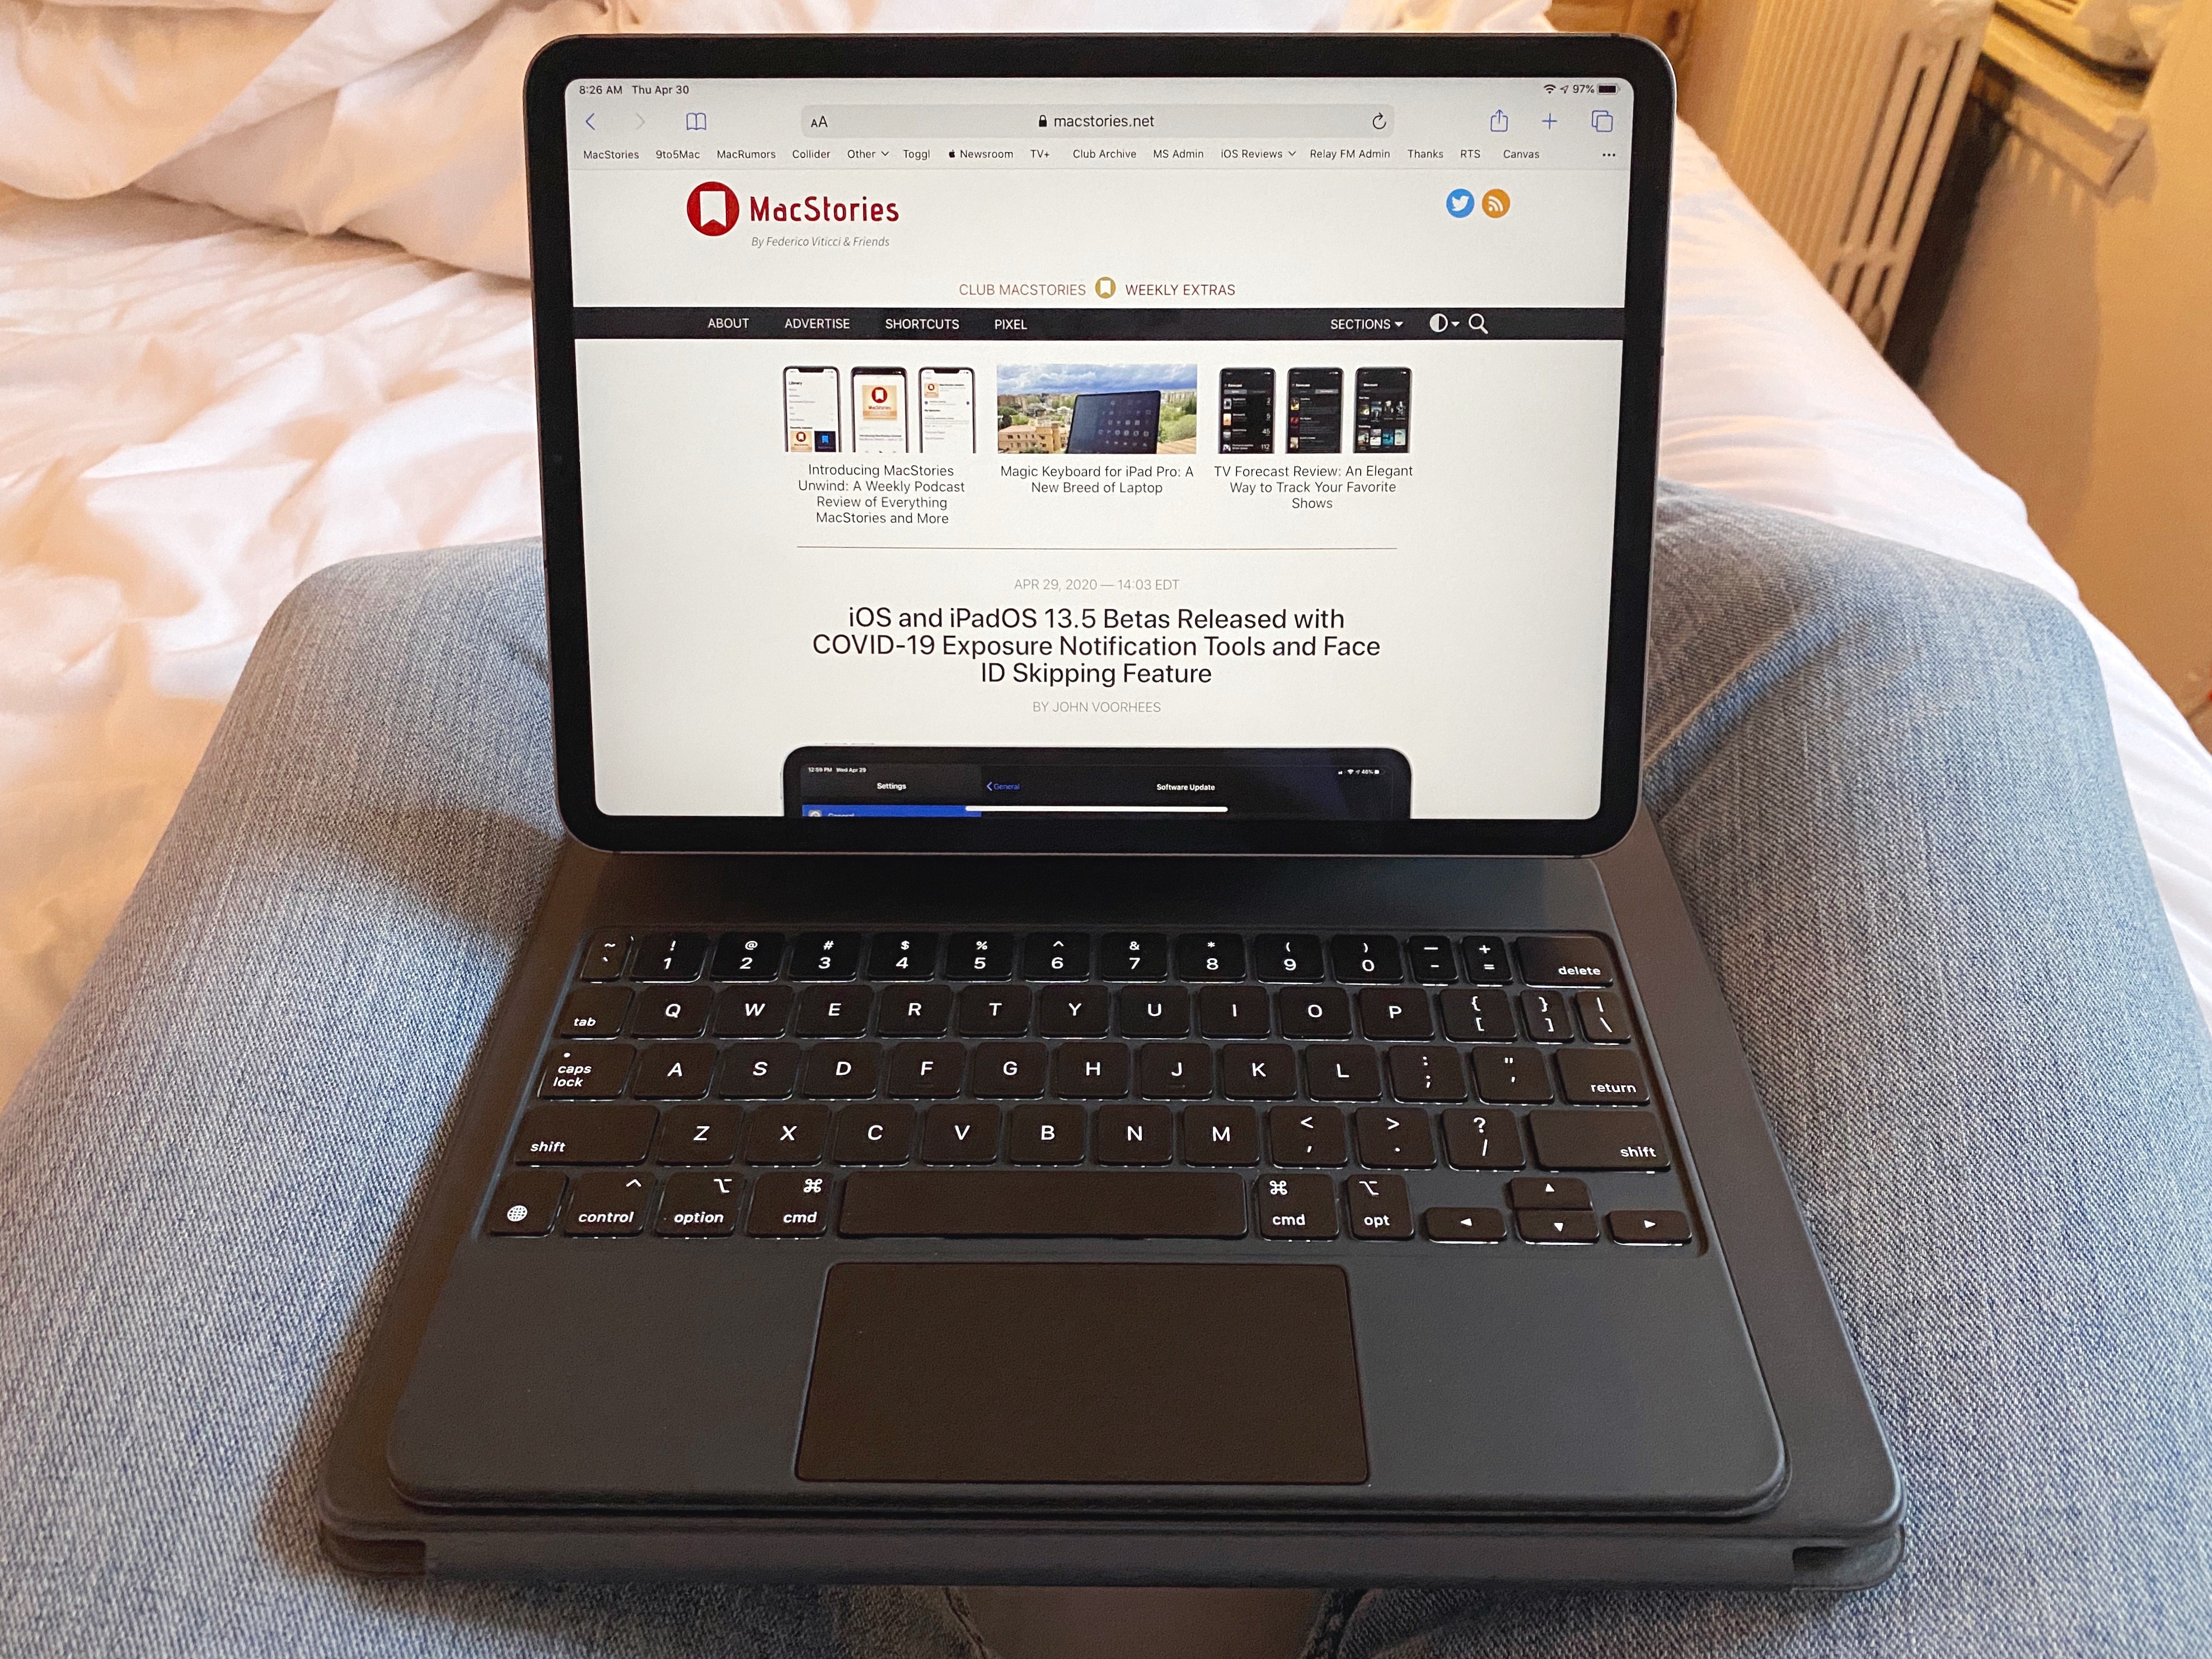 Using the 12.9-inch Smart Keyboard Folio, folded up, as a level surface for the 11-inch Magic Keyboard.